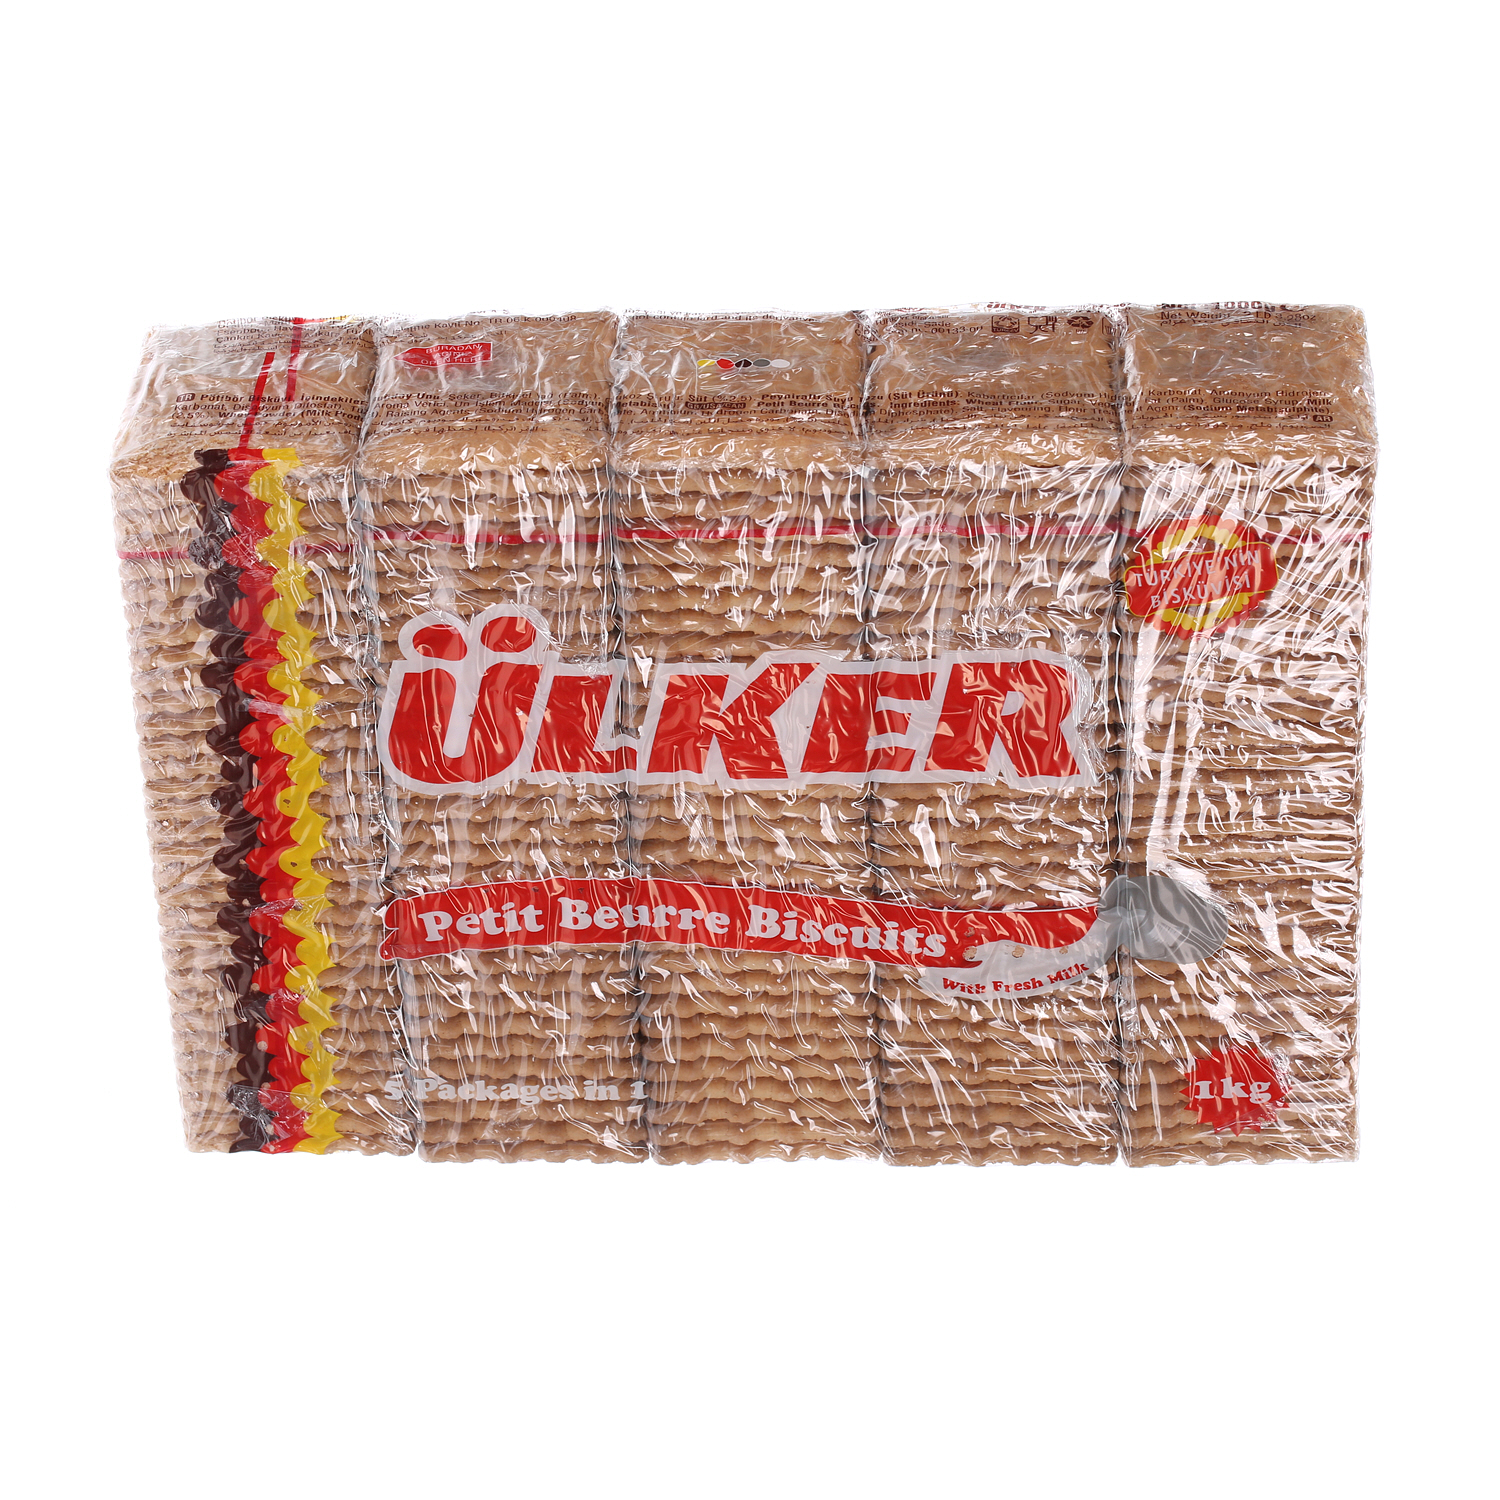 Ulker Petit Beurre Biscuits Family 1Kg